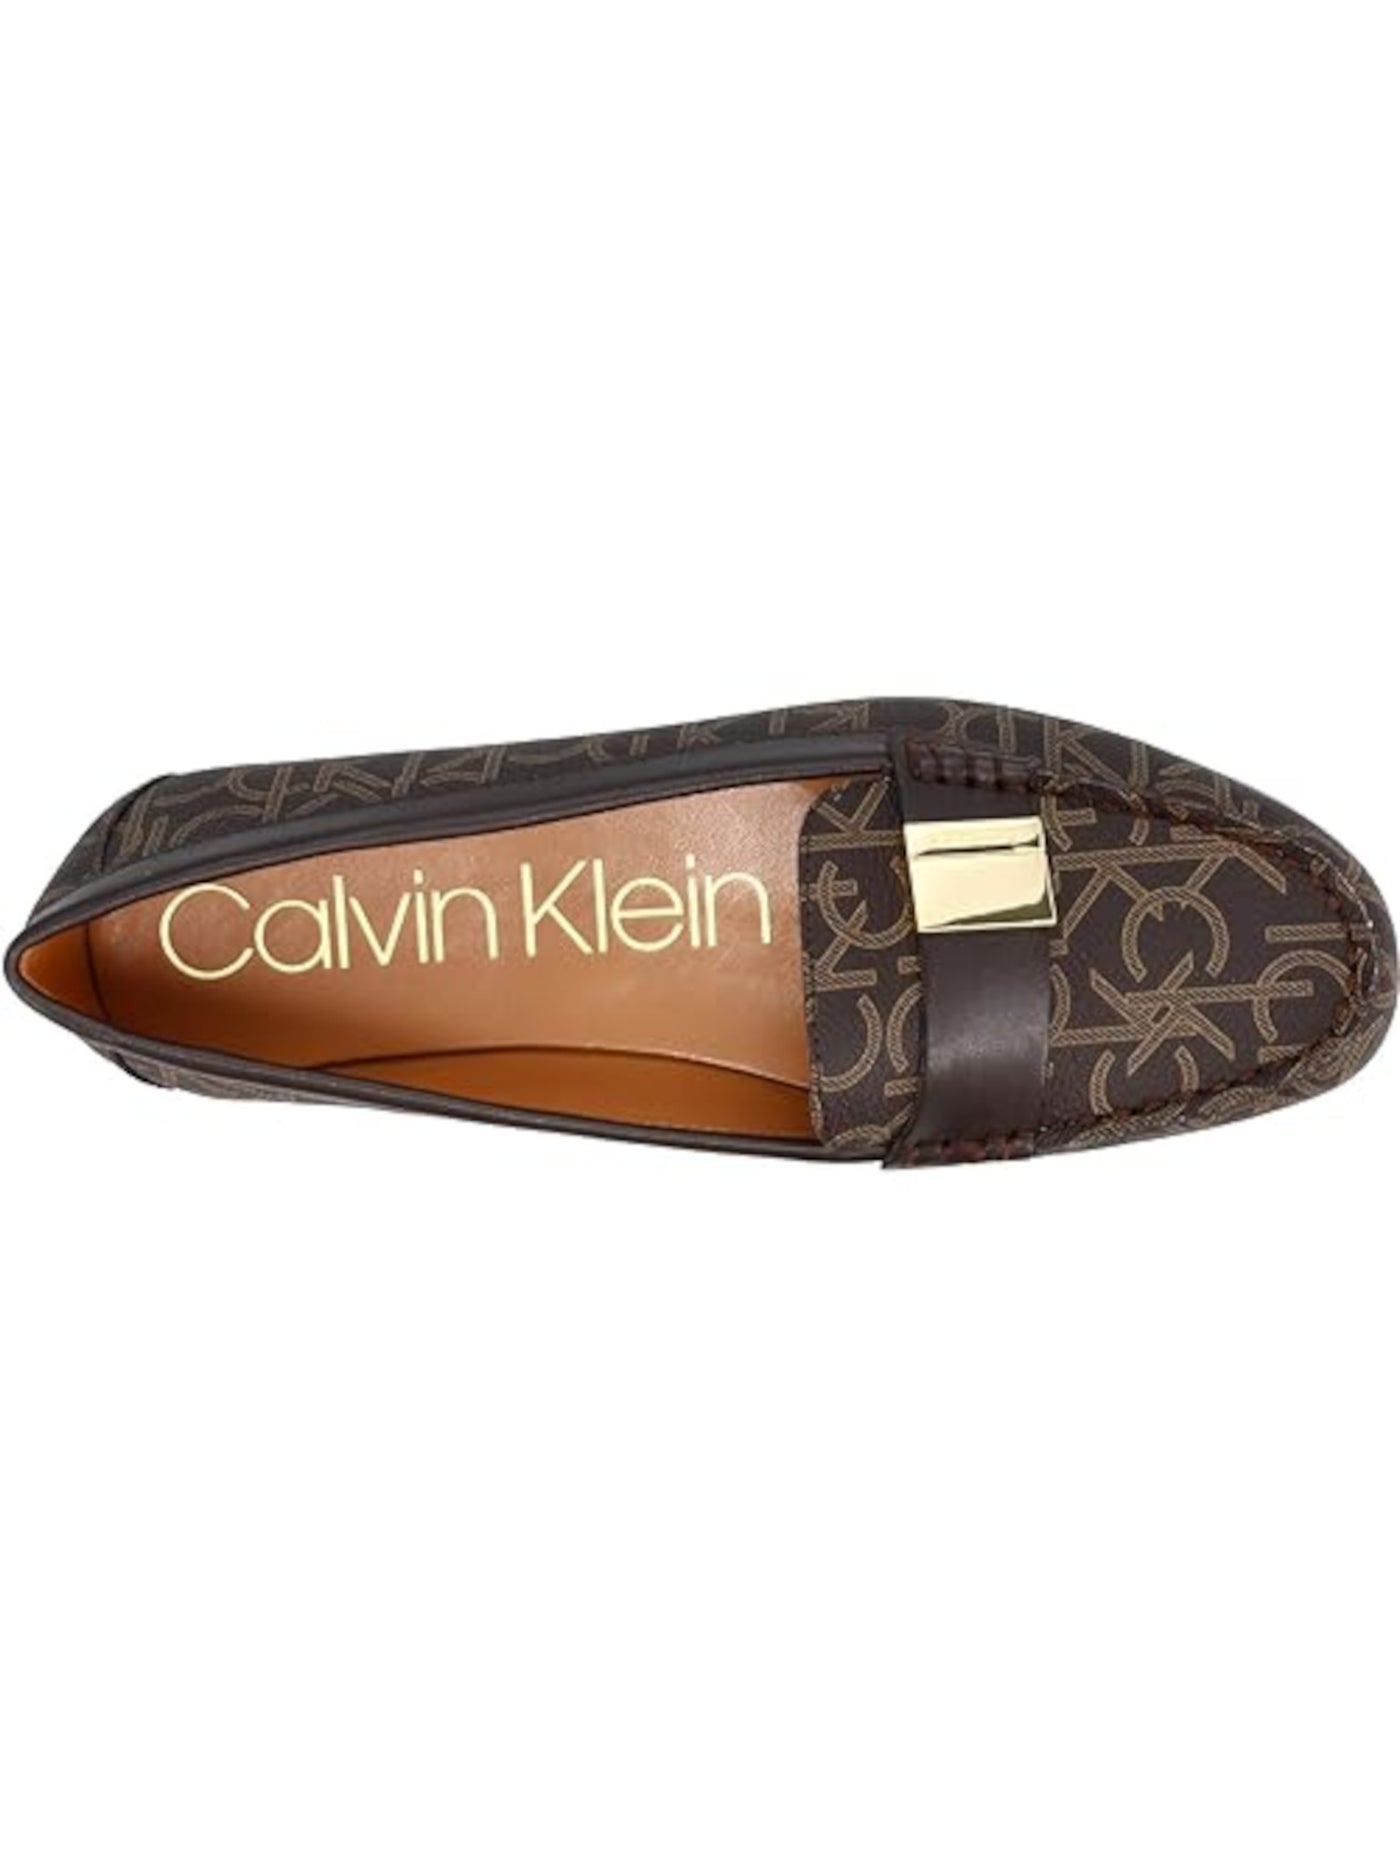 CALVIN KLEIN Womens Brown Logo Moc Toe Hardware Padded Lisa Round Toe Slip On Loafers Shoes 6 M